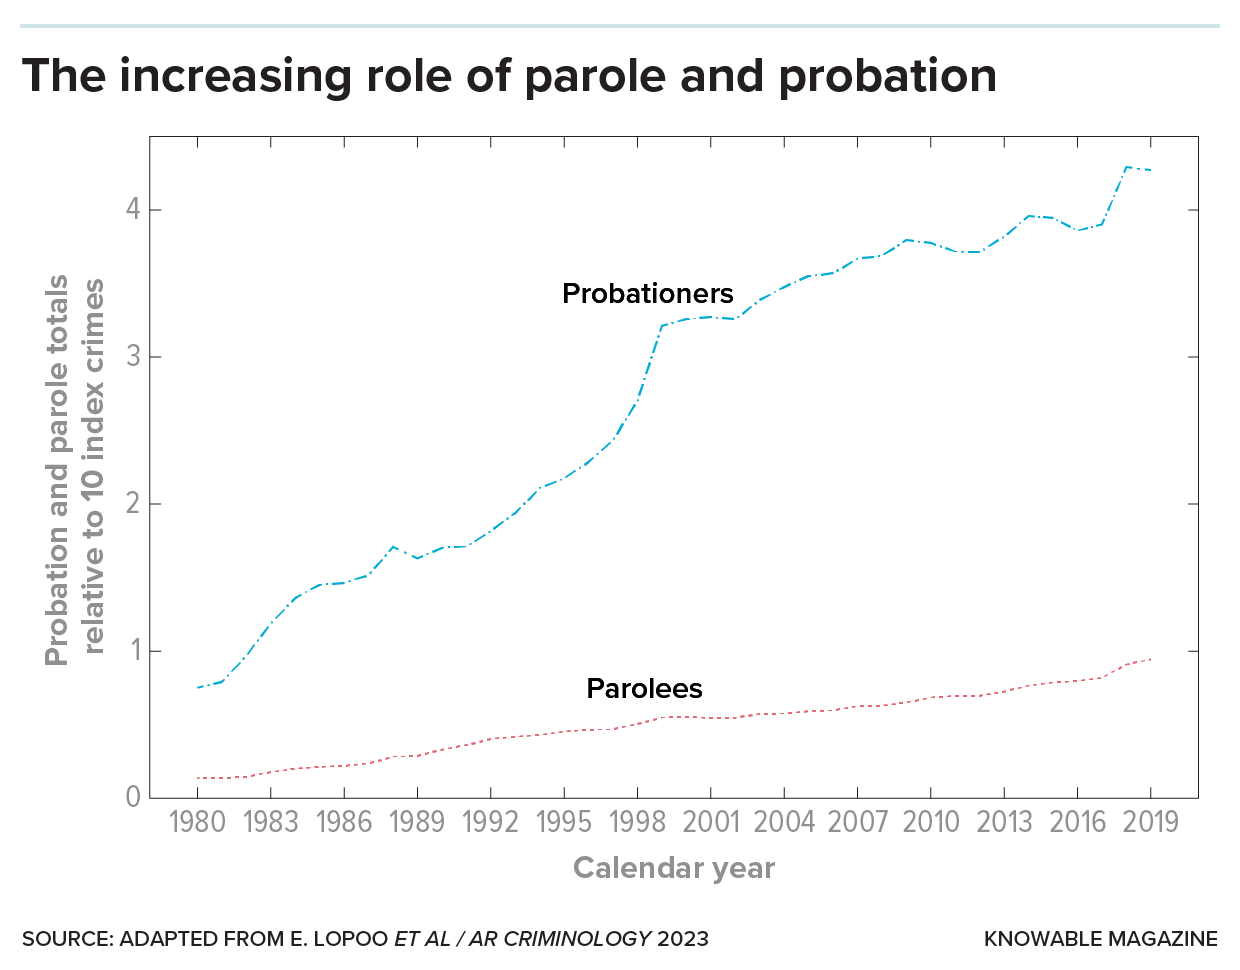 Graph showing increasing numbers of parolees and, especially, probationers relative to the number of crimes committed in the years 1980-2019. Probation has grown most rapidly.